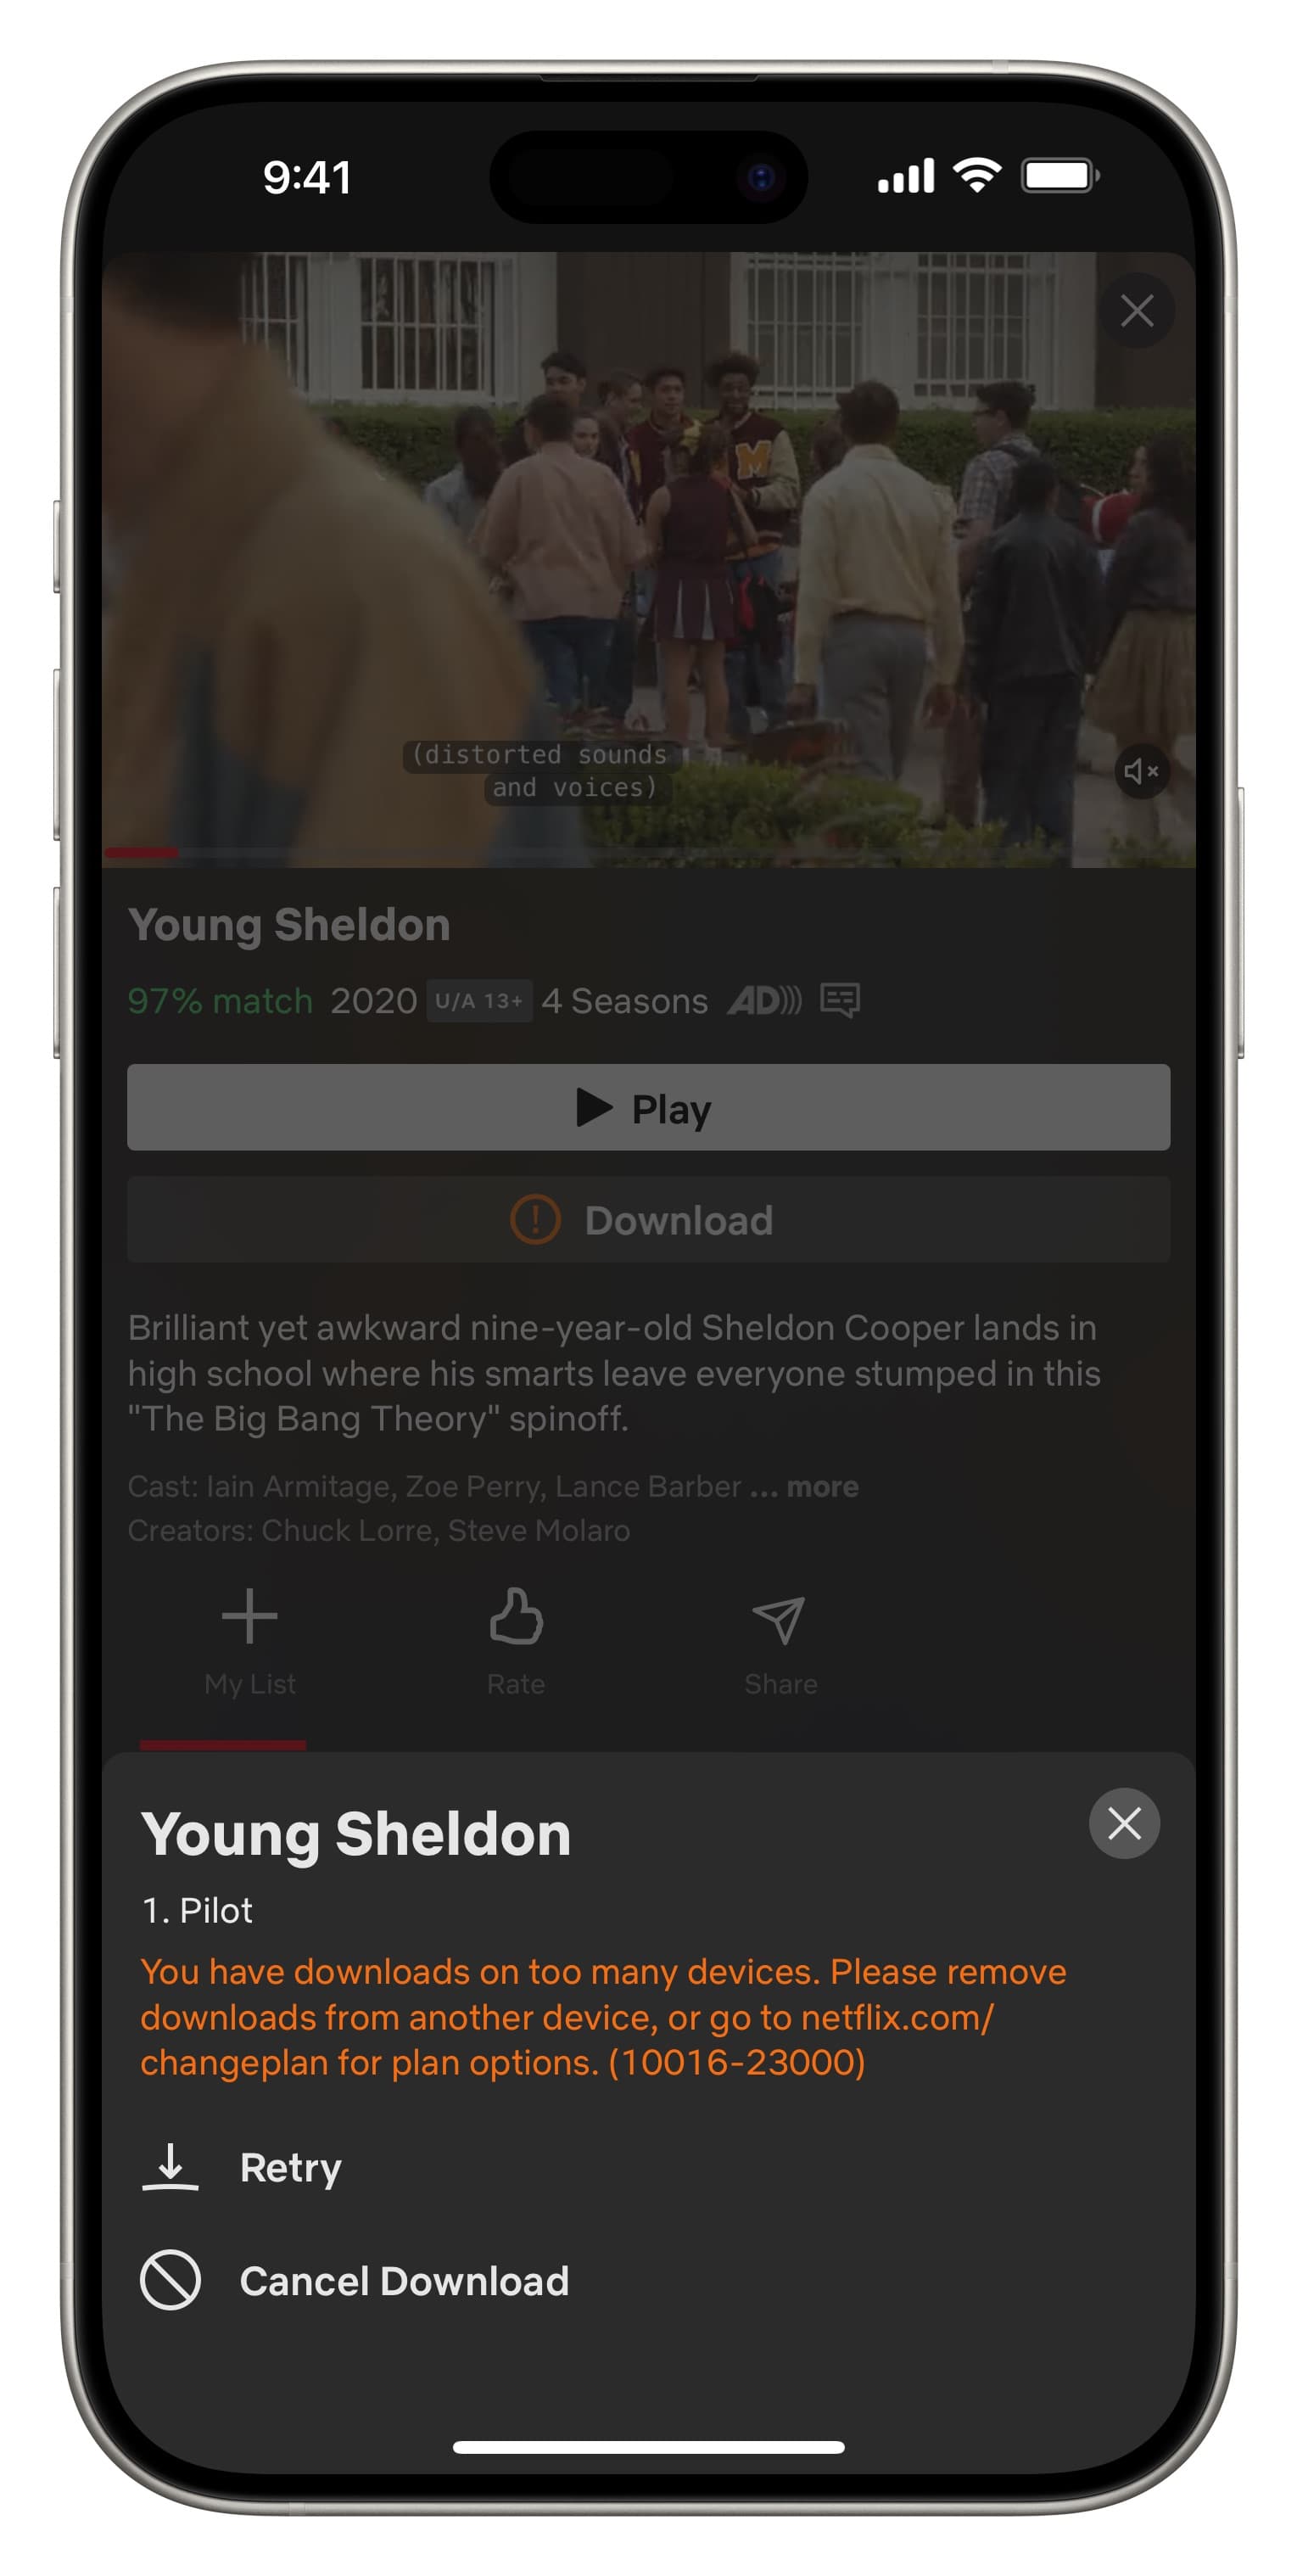 You have downloads on too many devices error in Netflix app